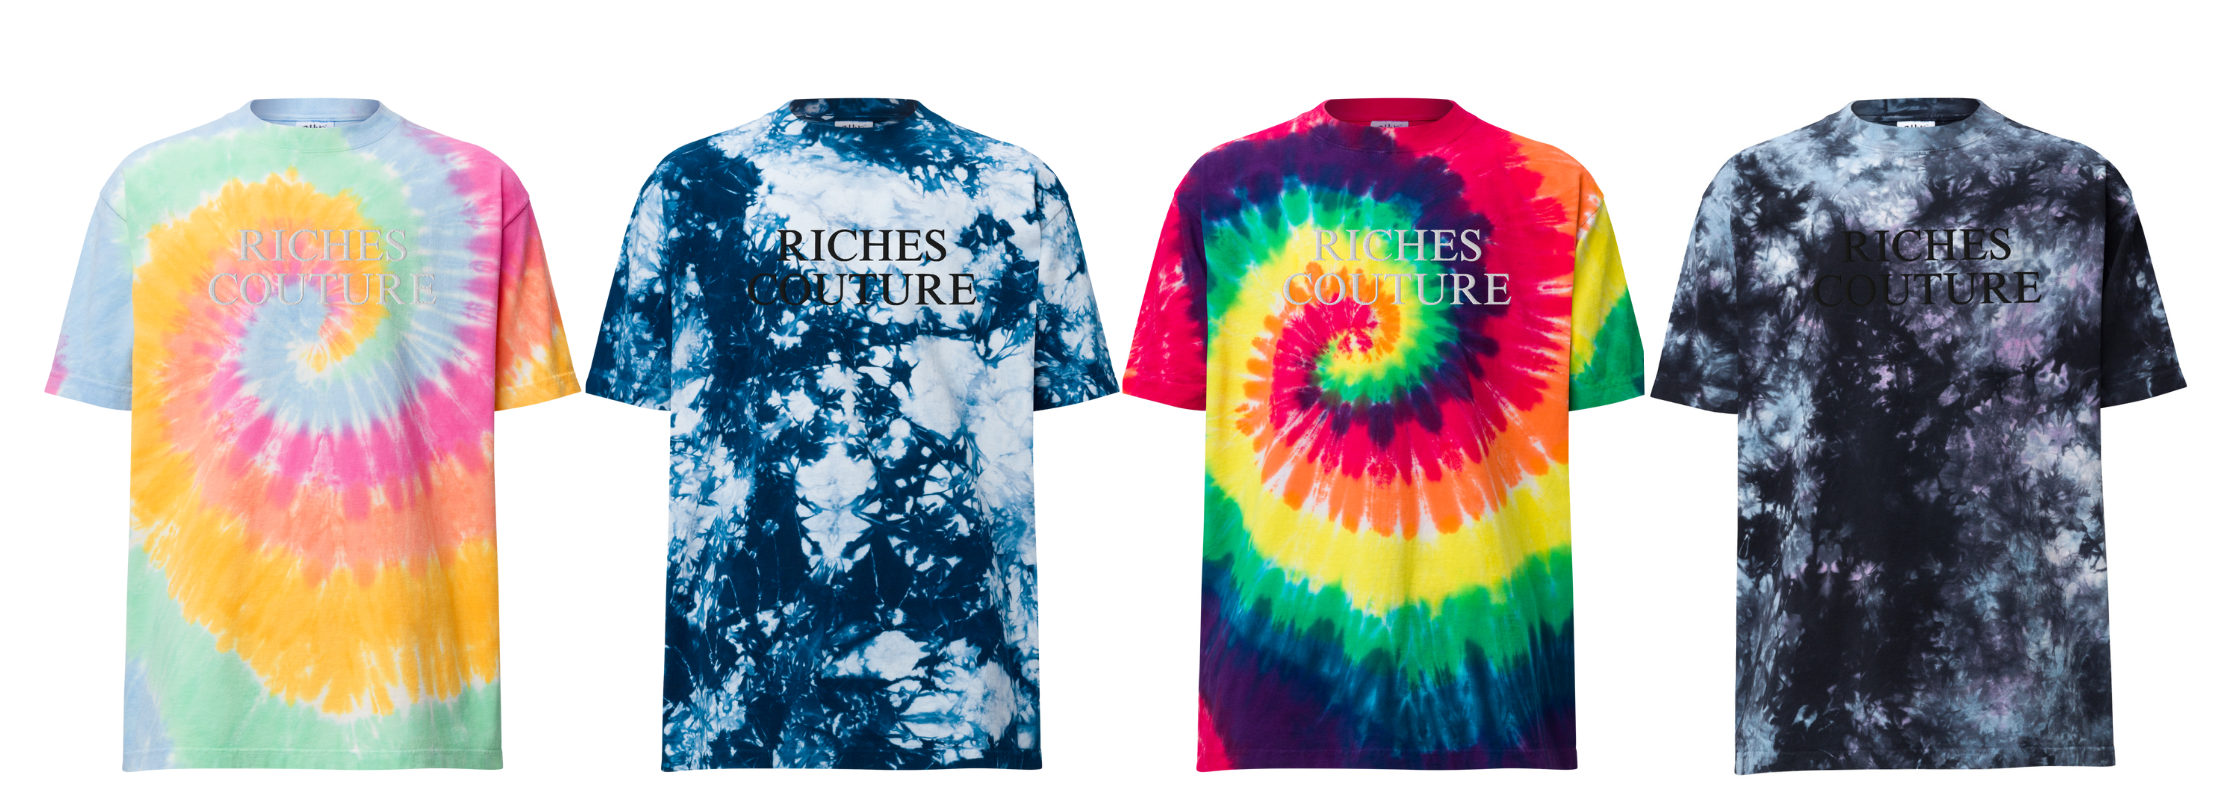 Riches Couture Tie Dye Shirt Collection